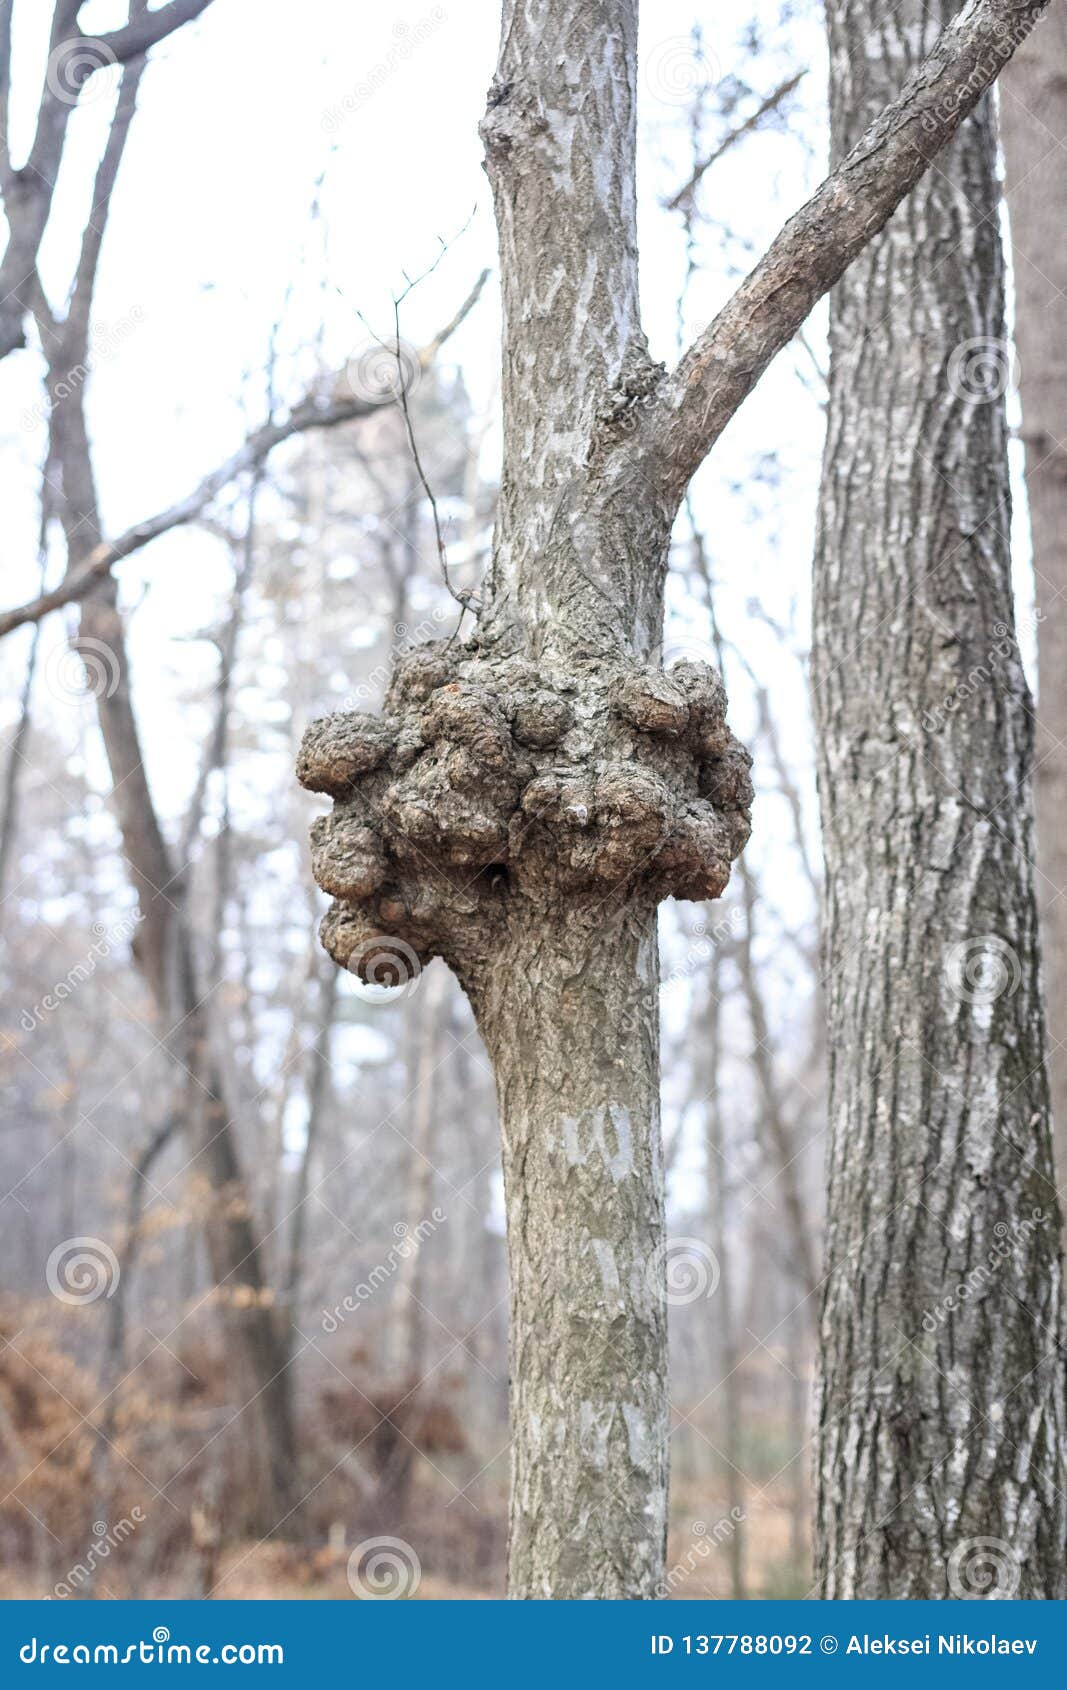 a gnarl or knot in wood looks like nodule